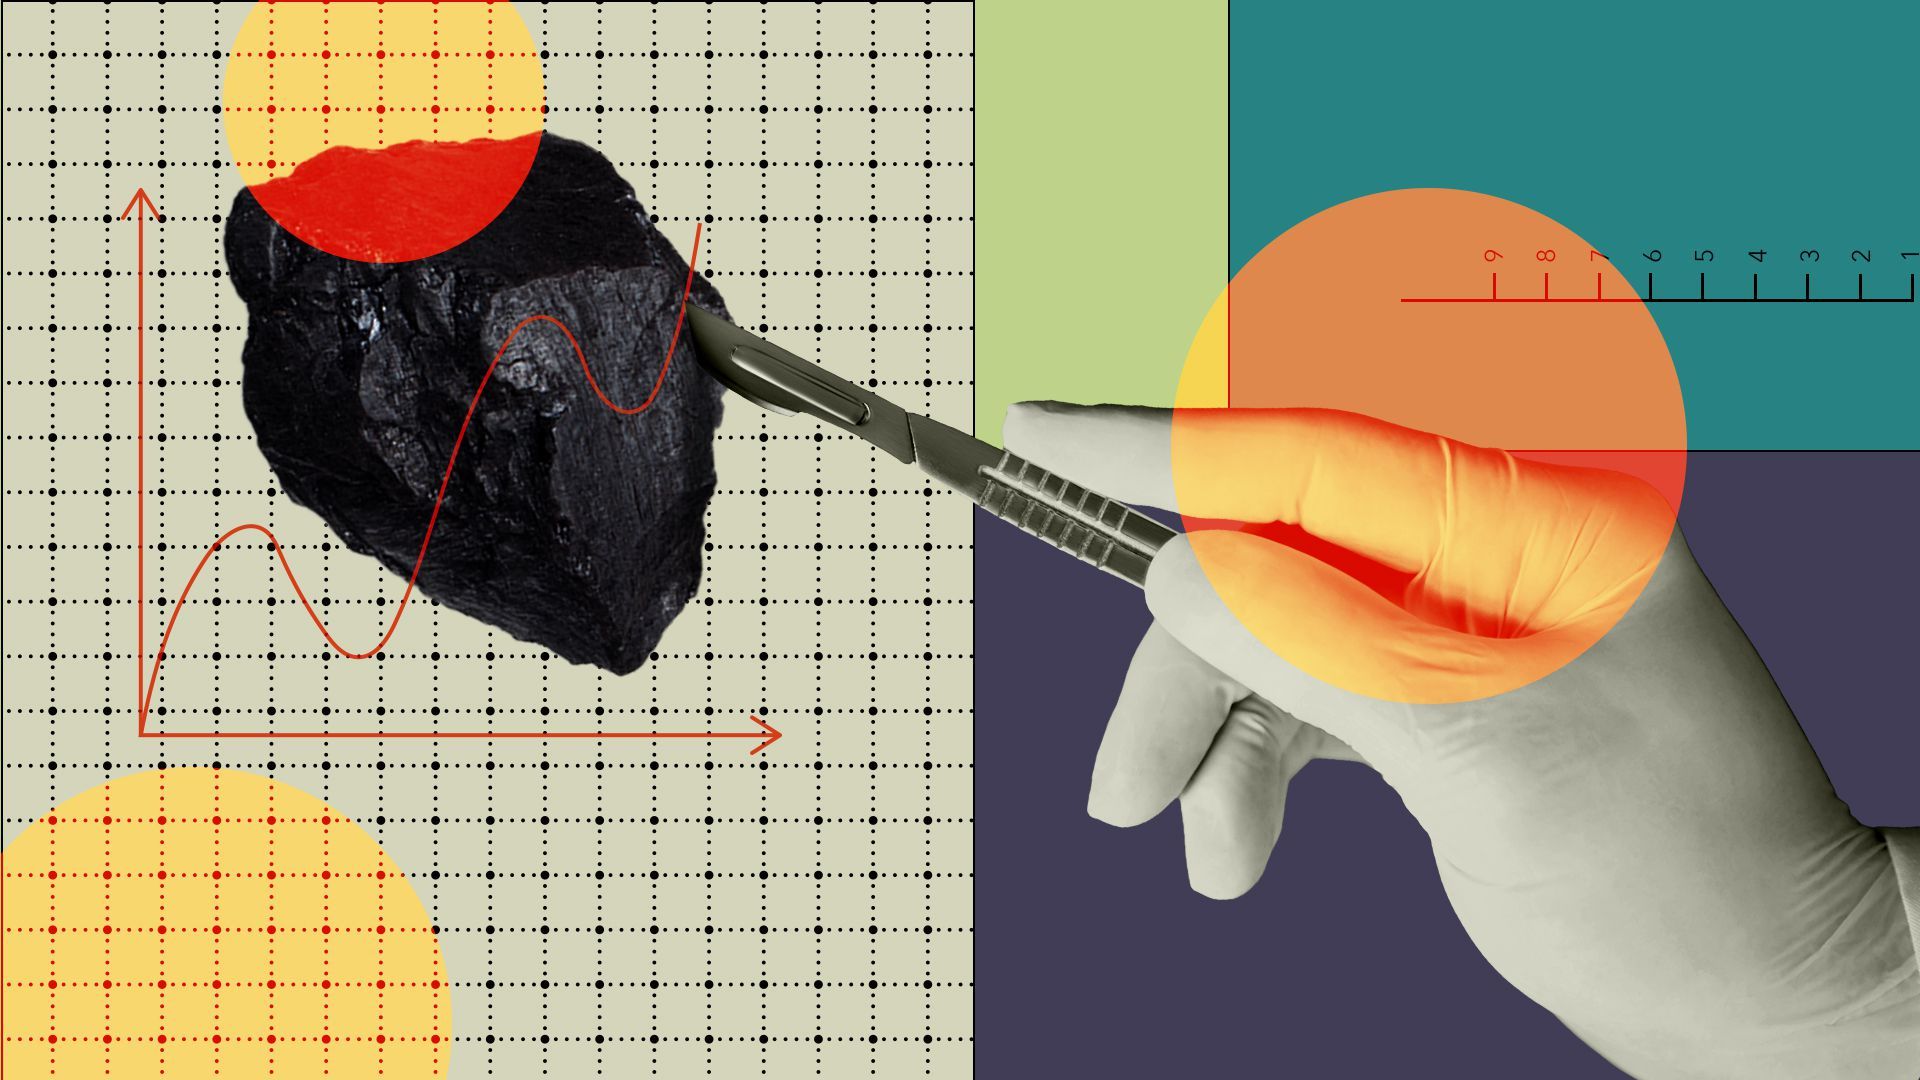 Illustration of a gloved hand cutting into a chunk of coal with a scalpel.